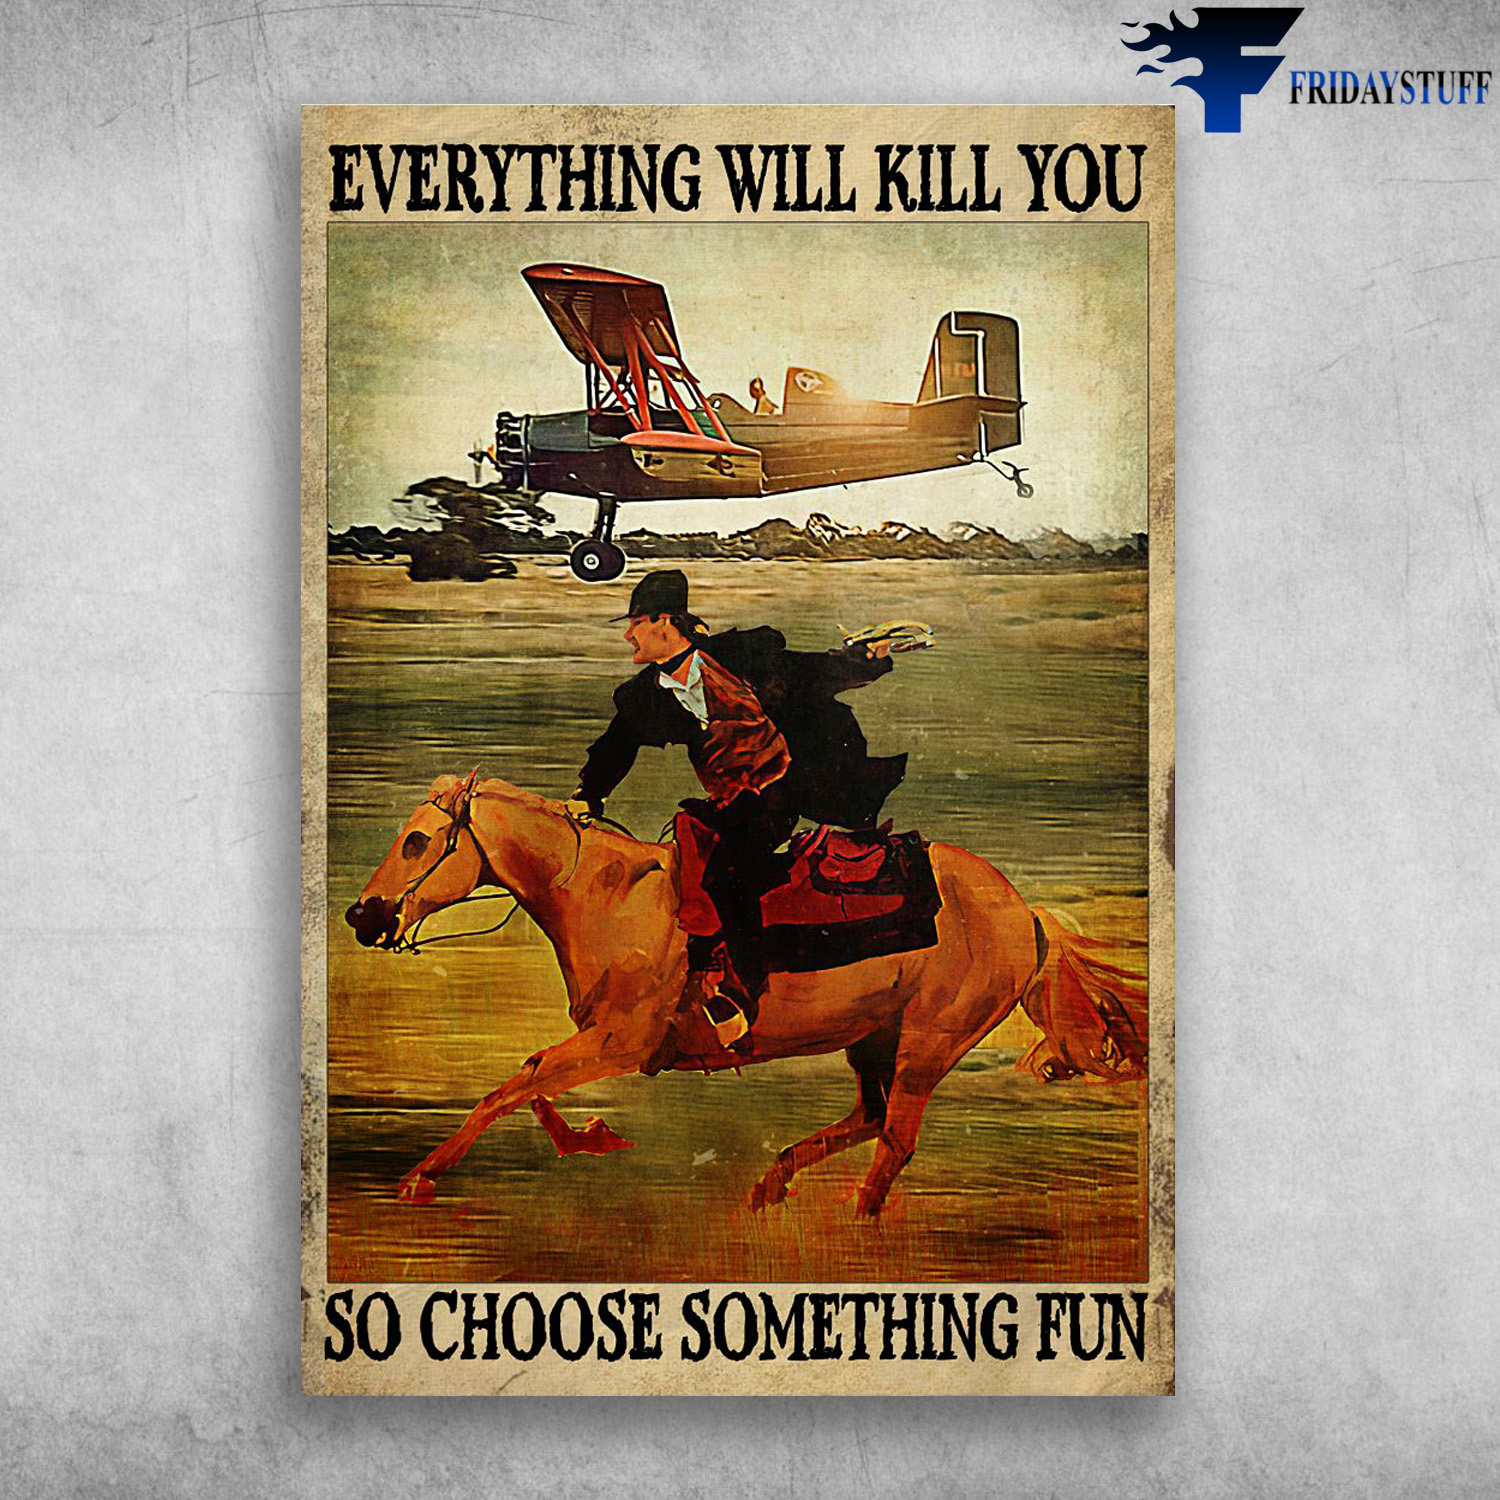 Man Riding Horse And The Plane - Everything Will Kill You, So Choose Something Fun